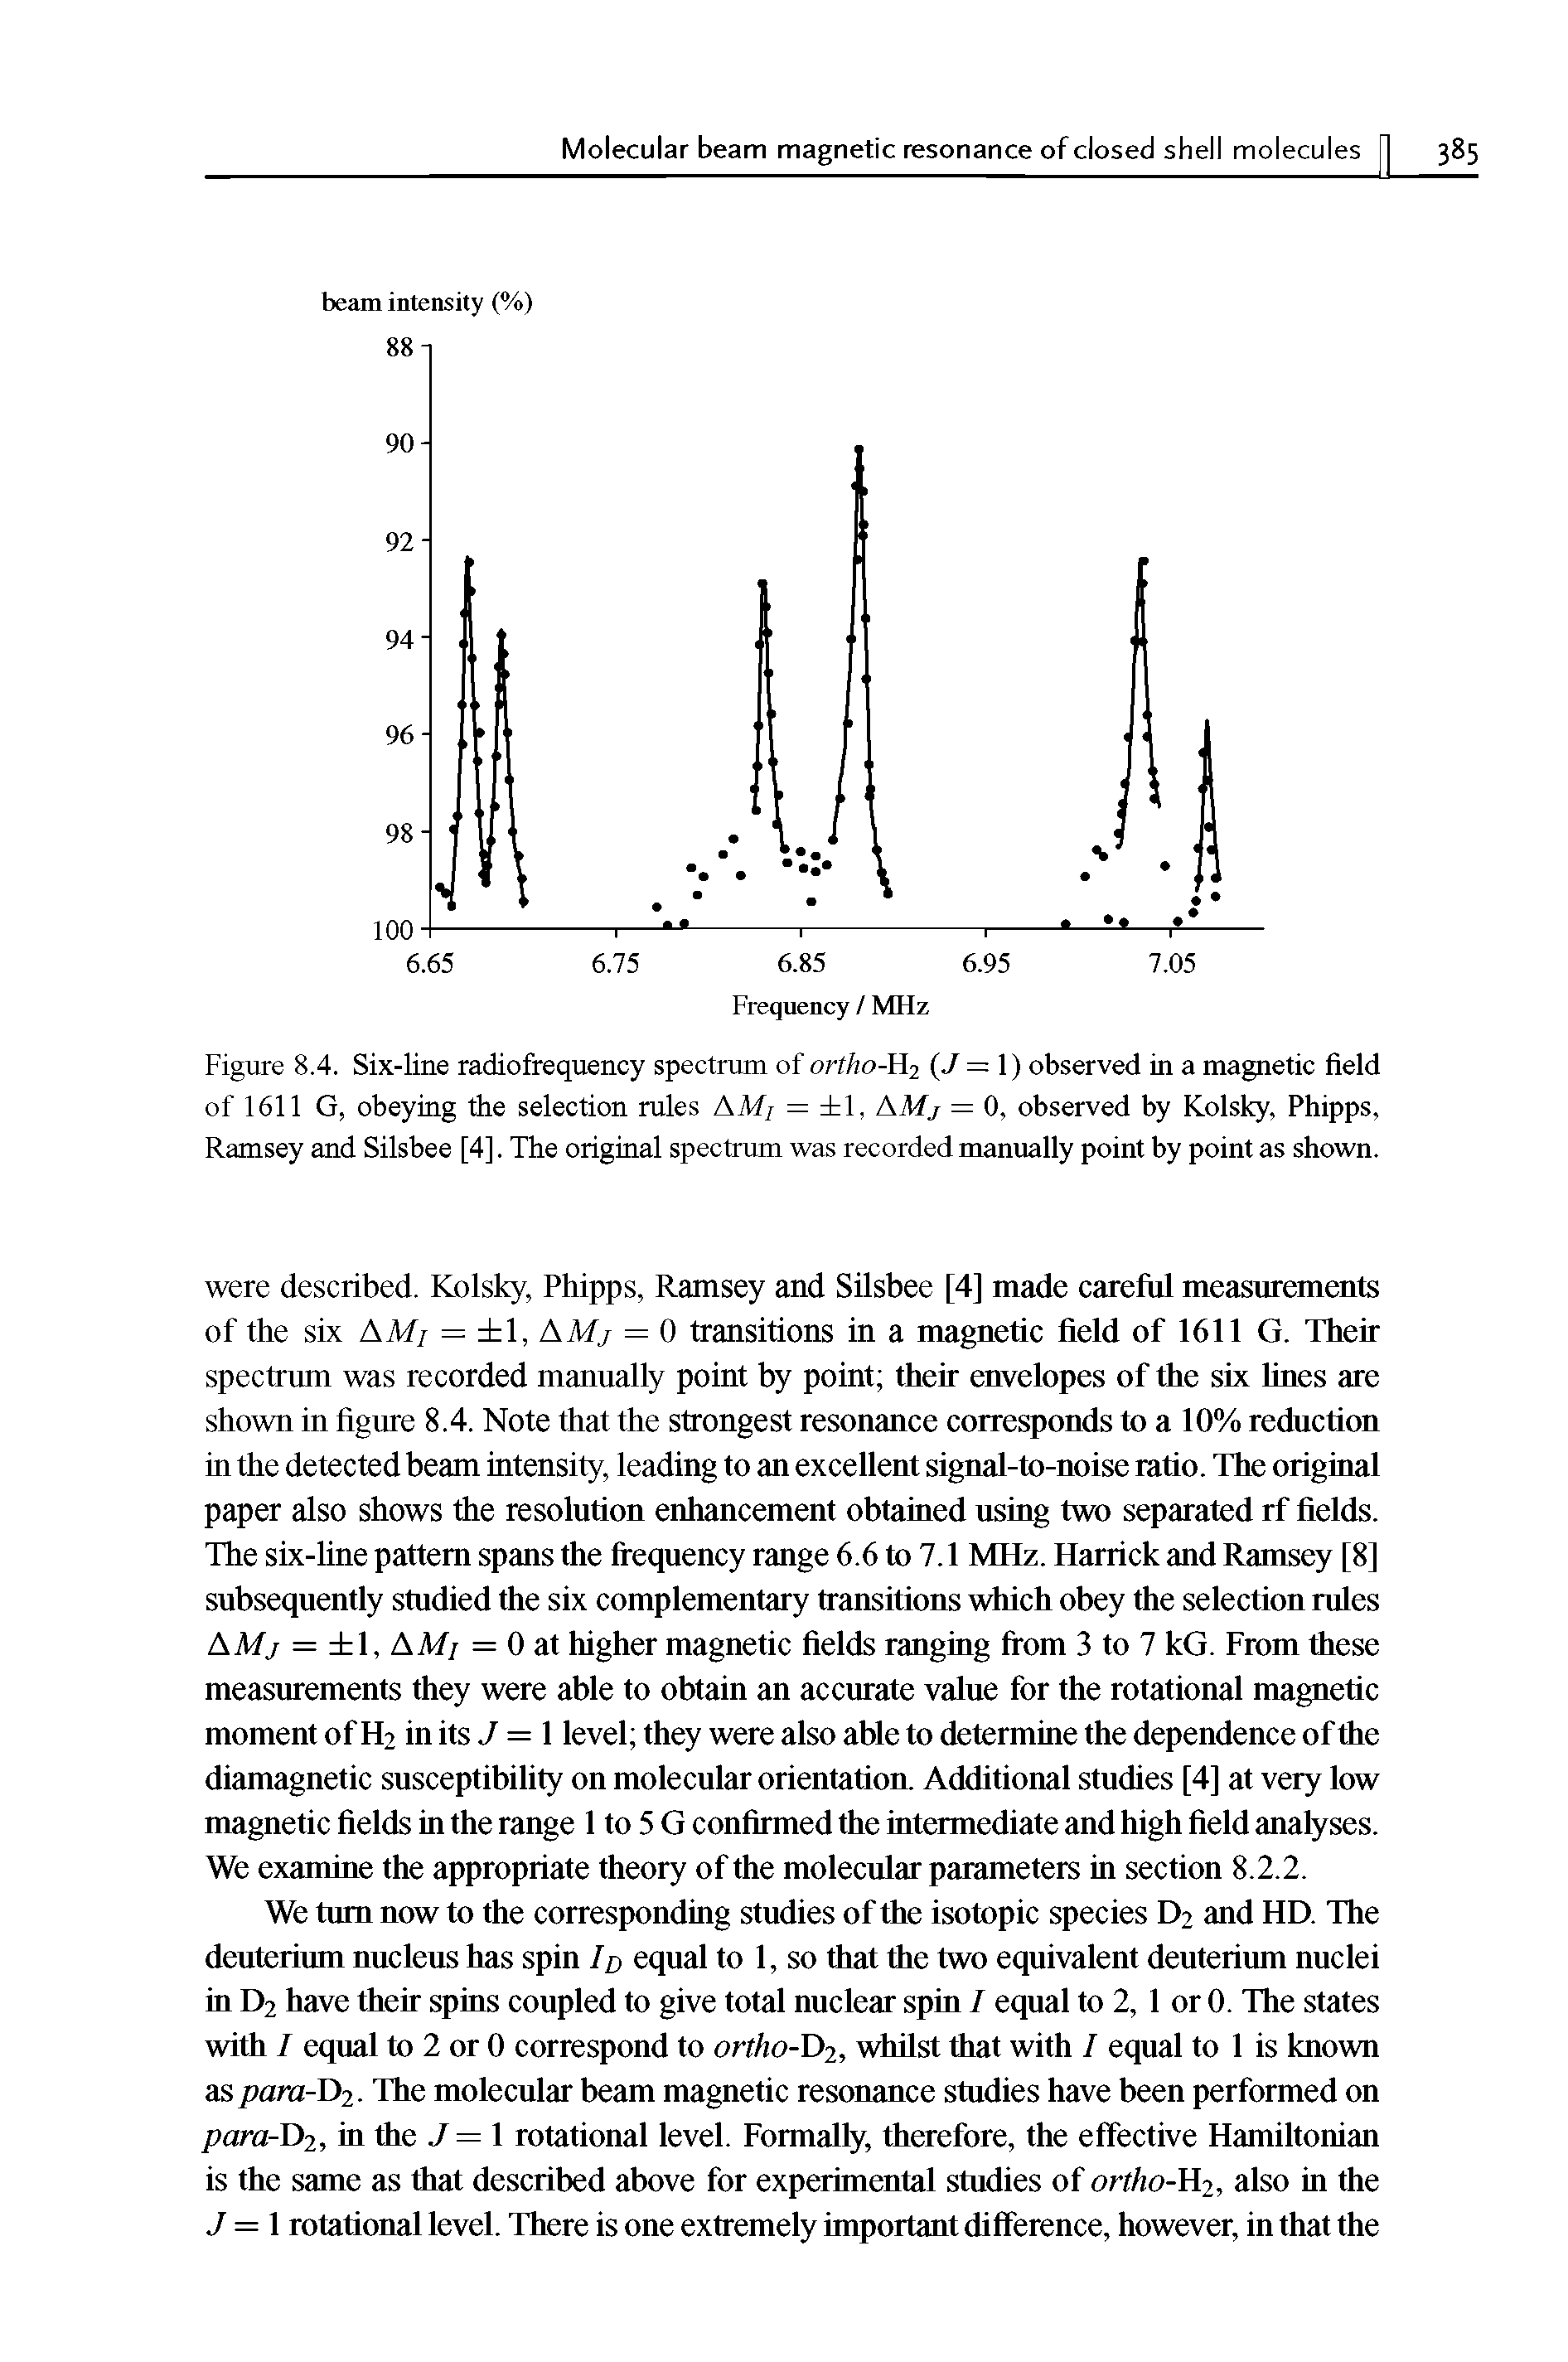 Figure 8.4. Six-line radiofrequency spectrum of ortho-H2 (J = 1) observed in a magnetic field of 1611 G, obeying the selection rules AM/ = 1, AMj = 0, observed by Kolsky, Phipps, Ramsey and Silsbee [4]. The original spectrum was recorded manually point by point as shown.